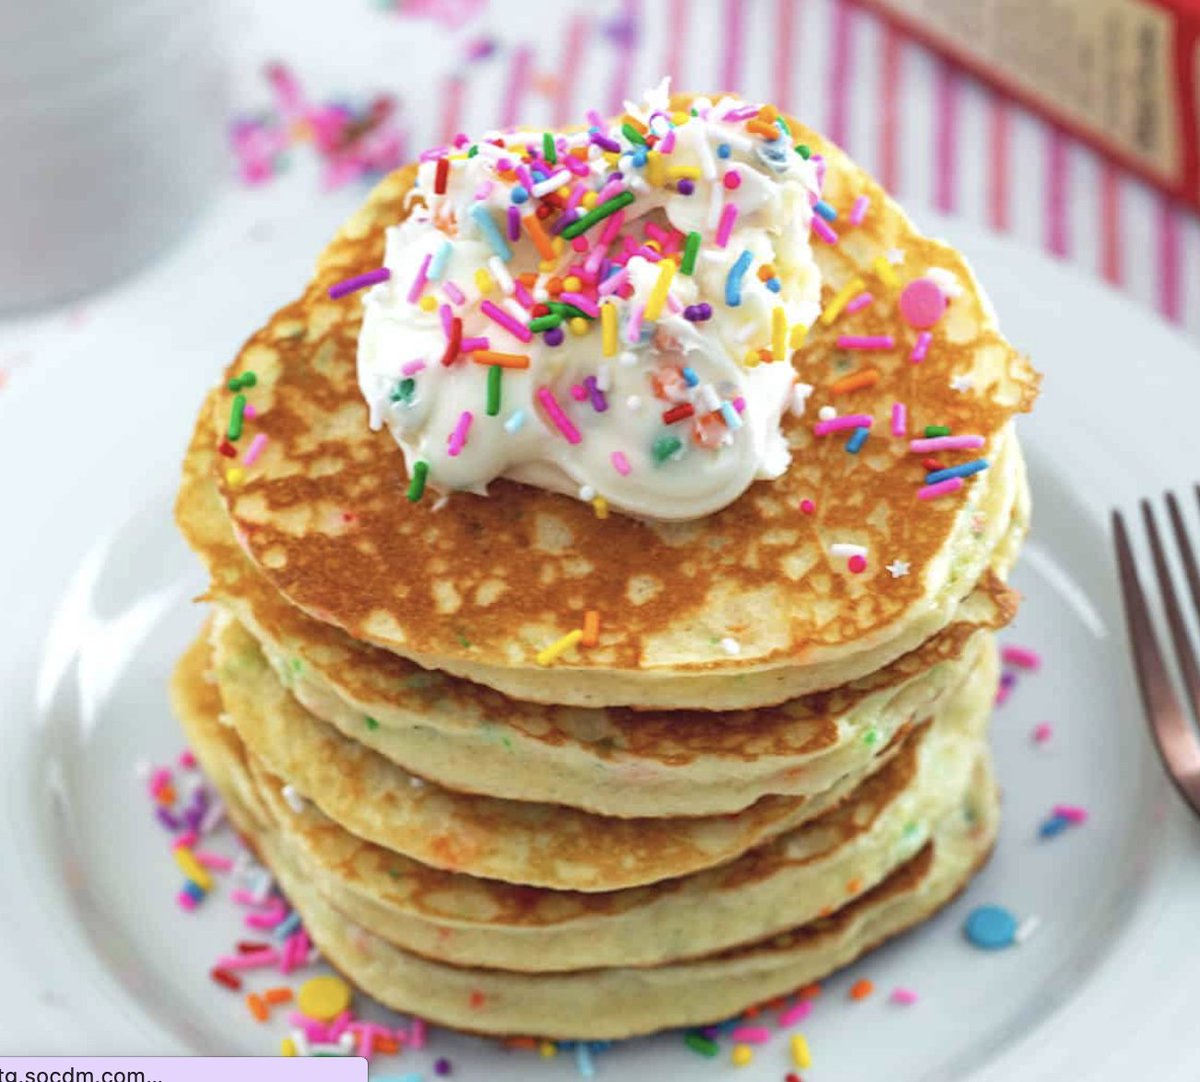 Weekend cooking tip: When making pancakes with kids, the first is for practice, and the rest is for eating. 🥞👶 

#PancakeParenting #CookingWithKids #KidsActivities #YummyFood #ParentingTips #Parenting #Kids #Mom #Dad